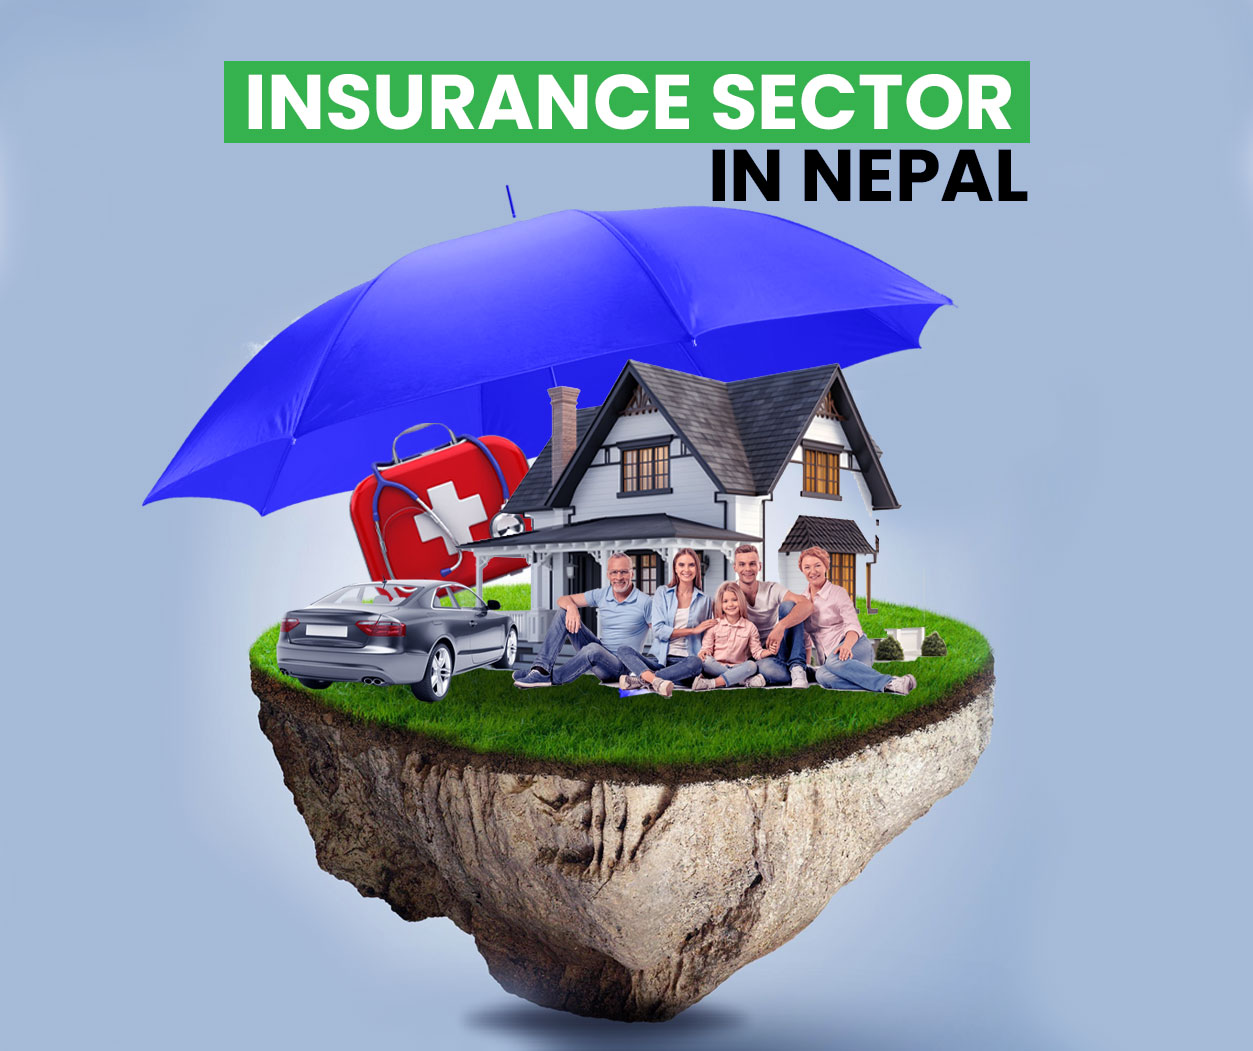 How the Insurance Sector in Nepal is Evolving?